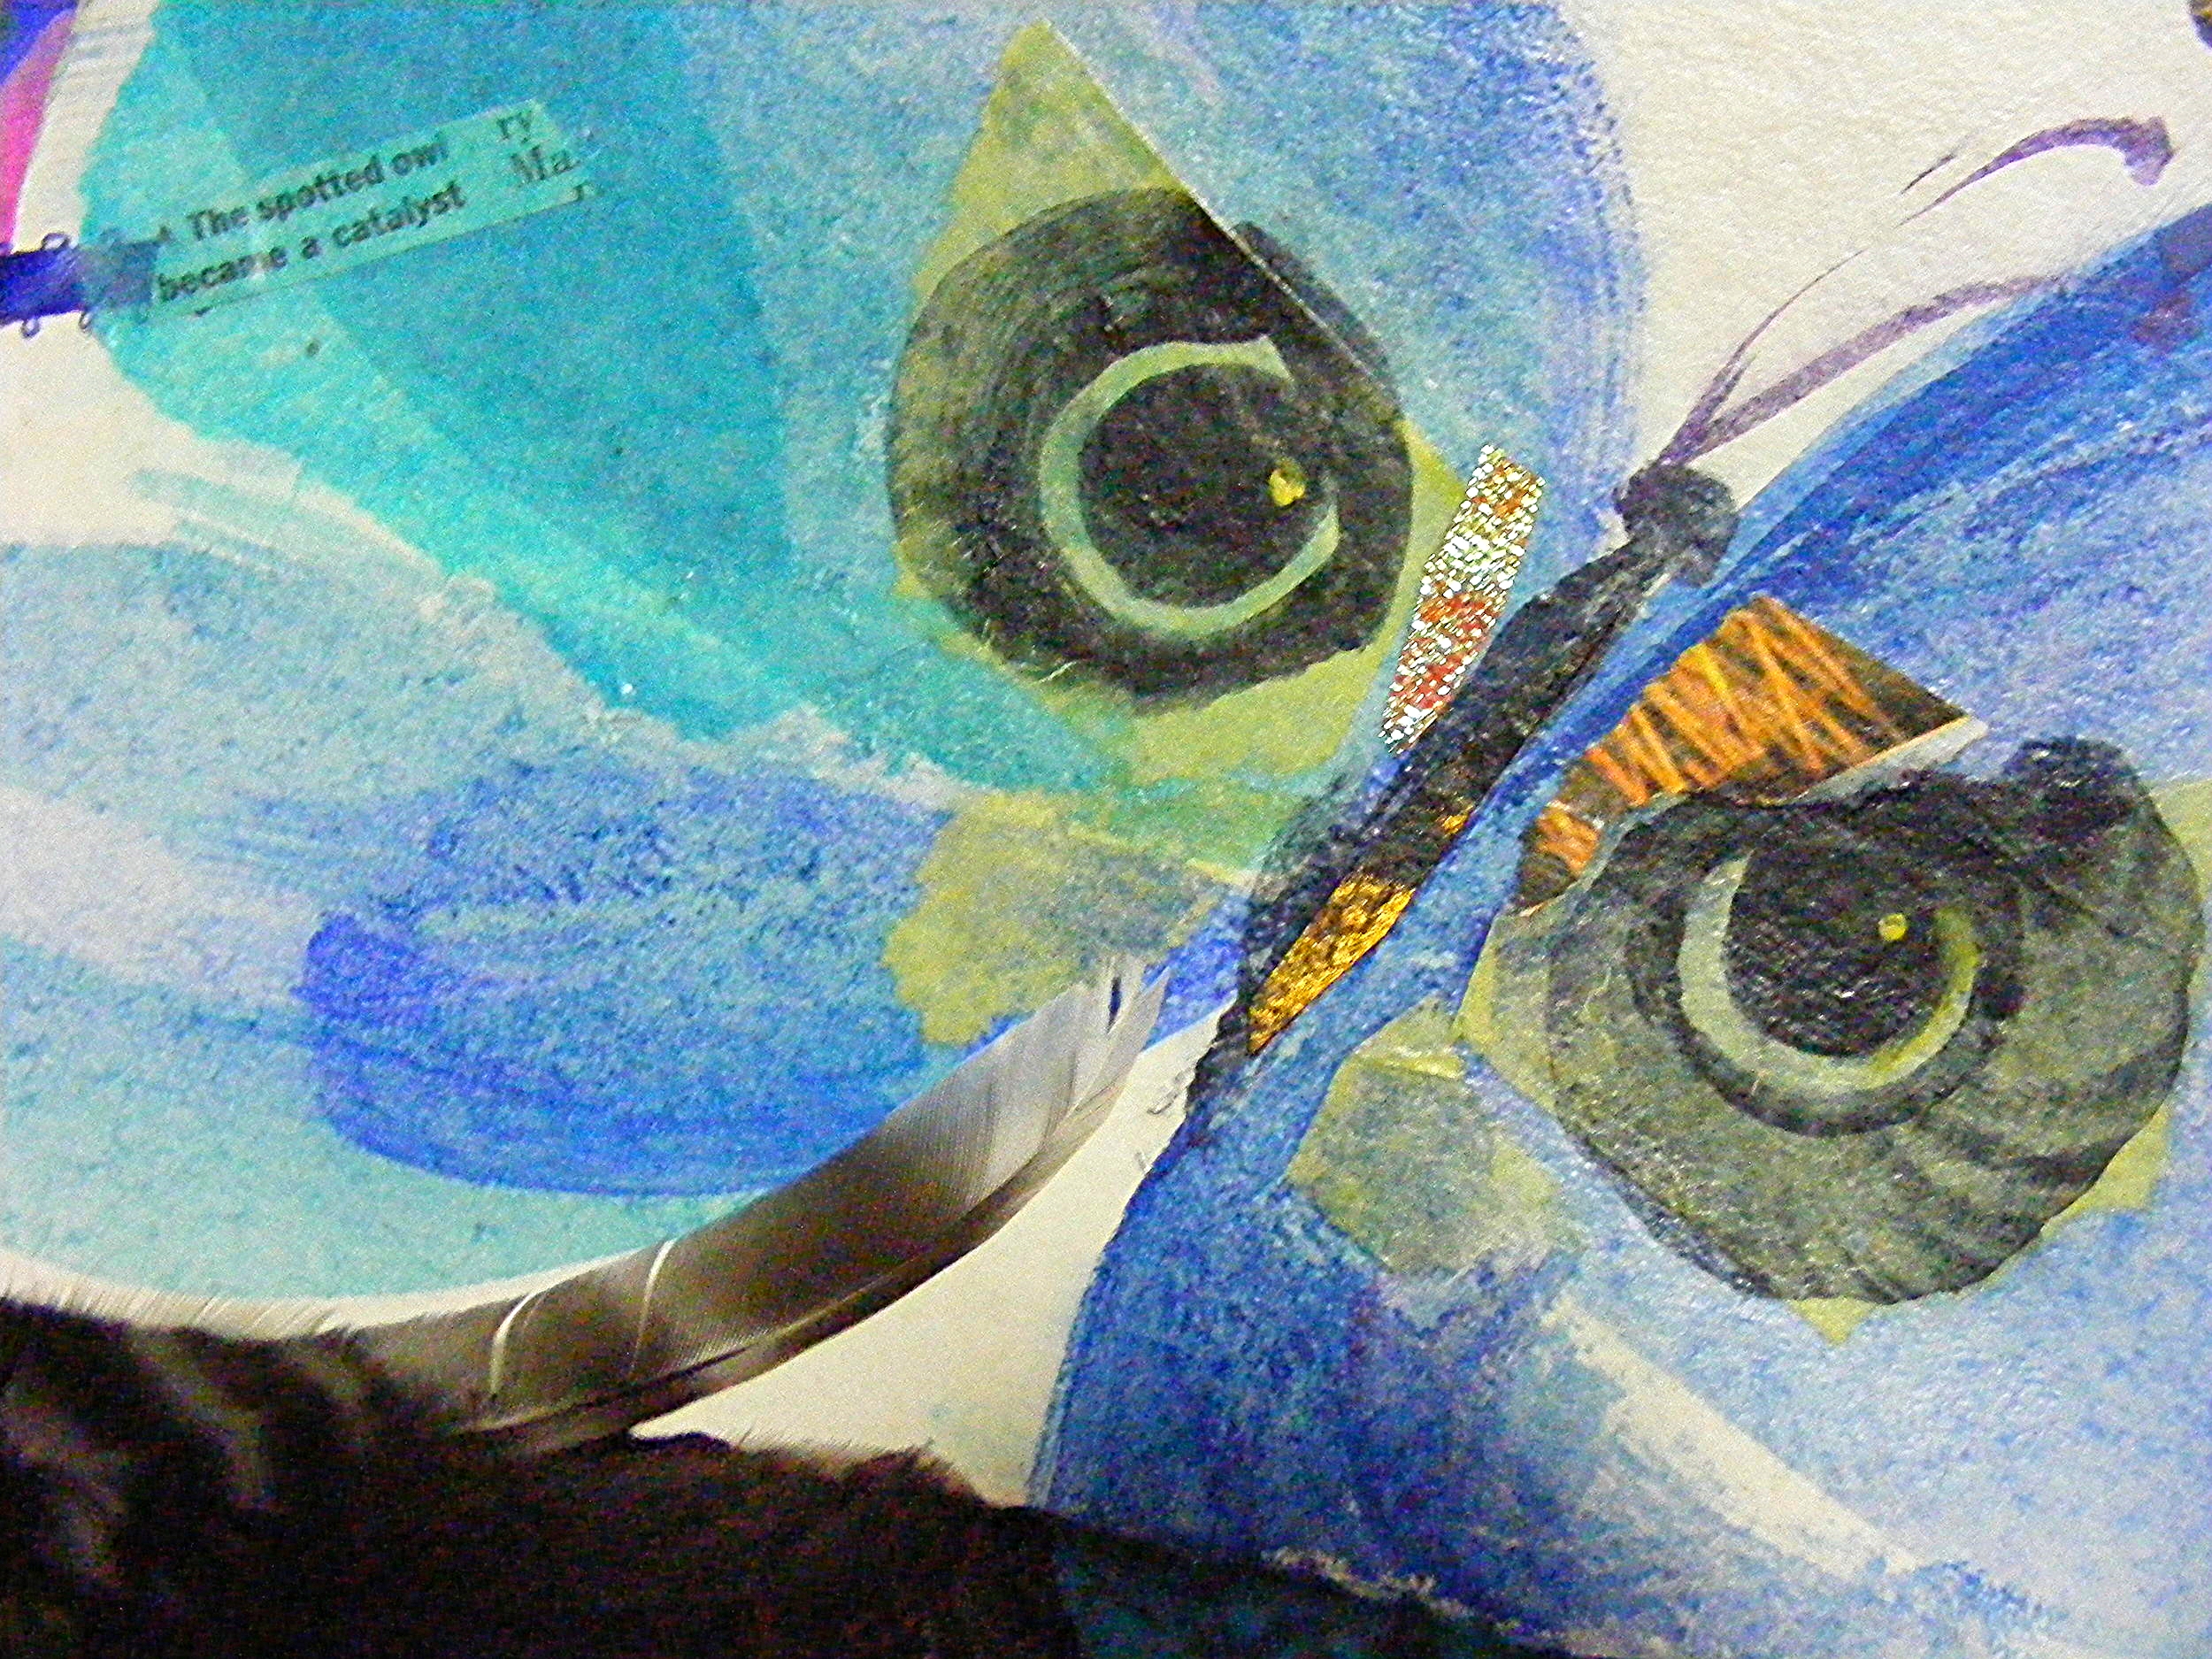 Detail from "EyeSong", copyright 2012 - A. Lindsey